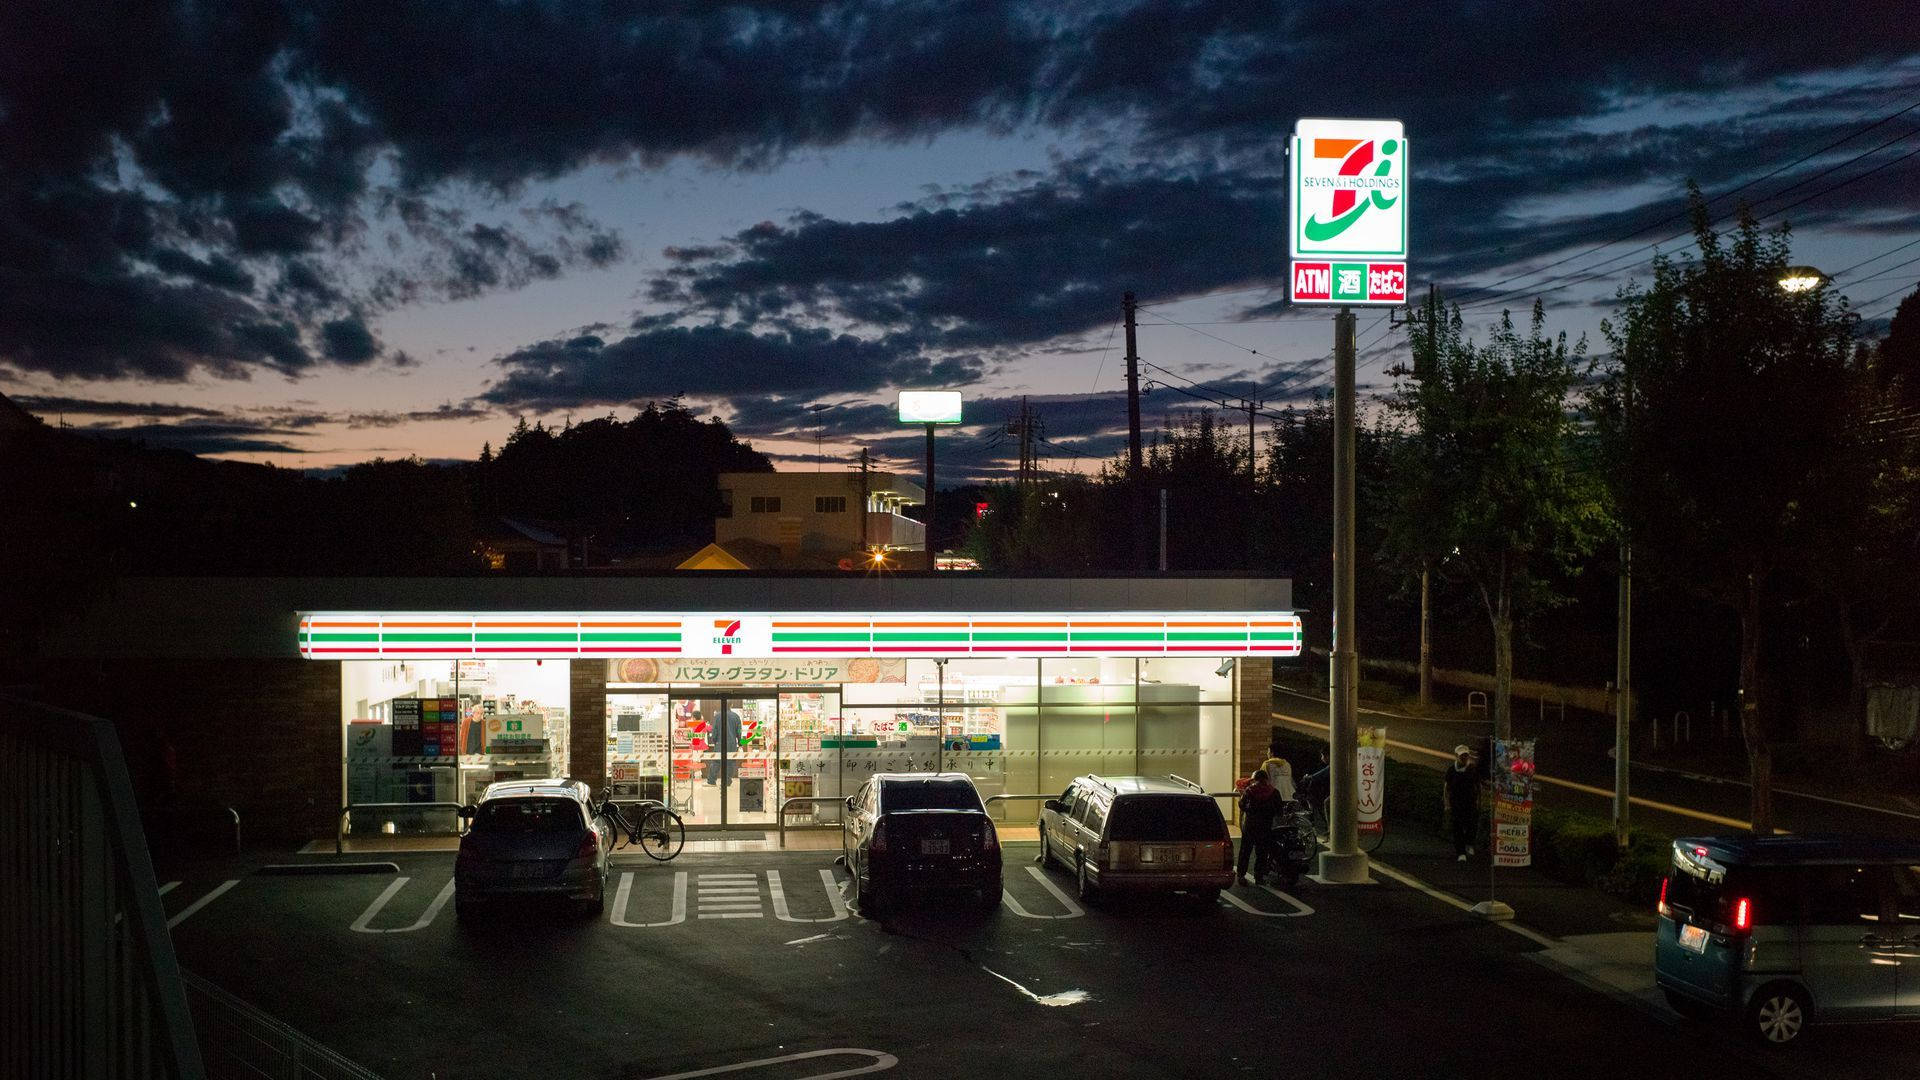 7 Eleven Store At Sunset Wallpaper